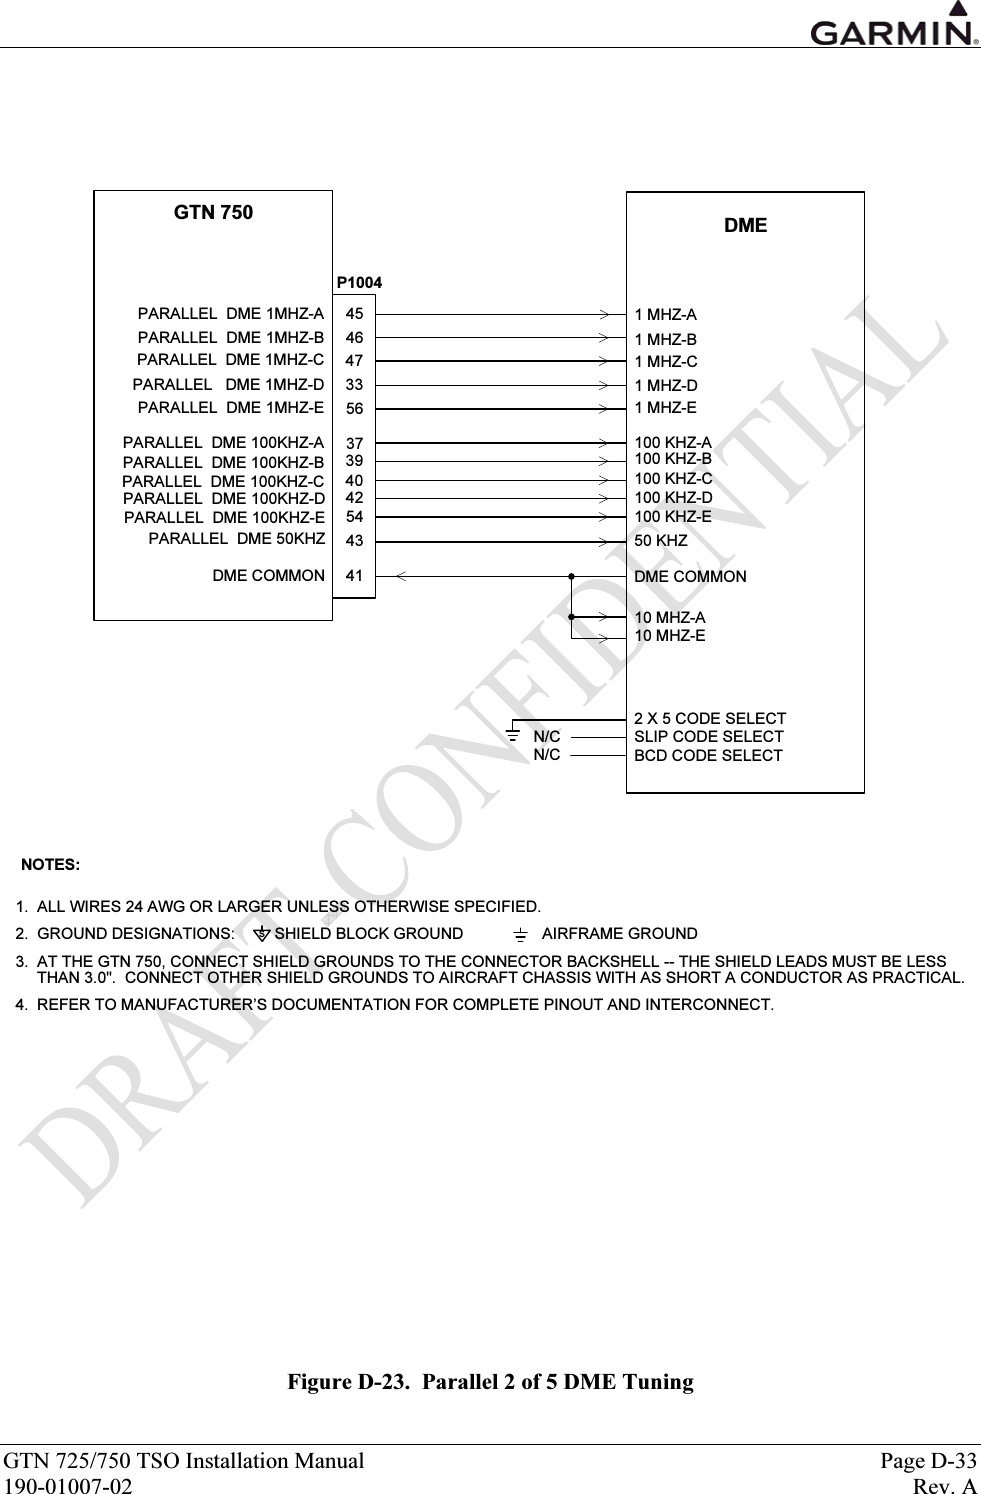  GTN 725/750 TSO Installation Manual  Page D-33 190-01007-02  Rev. A DME1 MHZ-A1 MHZ-B1 MHZ-C1 MHZ-D1 MHZ-E100 KHZ-A100 KHZ-B100 KHZ-C2 X 5 CODE SELECTSLIP CODE SELECT10 MHZ-ADME COMMONBCD CODE SELECT100 KHZ-D100 KHZ-E50 KHZ10 MHZ-EGTN 750PARALLEL  DME 1MHZ-APARALLEL  DME 1MHZ-BPARALLEL  DME 1MHZ-CPARALLEL   DME 1MHZ-DPARALLEL  DME 1MHZ-EPARALLEL  DME 100KHZ-APARALLEL  DME 100KHZ-BPARALLEL  DME 100KHZ-CDME COMMONPARALLEL  DME 100KHZ-DPARALLEL  DME 100KHZ-EPARALLEL  DME 50KHZ454647335637394041435442N/CN/CNOTES:1.  ALL WIRES 24 AWG OR LARGER UNLESS OTHERWISE SPECIFIED.2.  GROUND DESIGNATIONS:         SHIELD BLOCK GROUND                  AIRFRAME GROUND3.  AT THE GTN 750, CONNECT SHIELD GROUNDS TO THE CONNECTOR BACKSHELL -- THE SHIELD LEADS MUST BE LESS THAN 3.0&quot;.  CONNECT OTHER SHIELD GROUNDS TO AIRCRAFT CHASSIS WITH AS SHORT A CONDUCTOR AS PRACTICAL. 4. REFER TO MANUFACTURER’S DOCUMENTATION FOR COMPLETE PINOUT AND INTERCONNECT.sP1004 Figure D-23.  Parallel 2 of 5 DME Tuning 